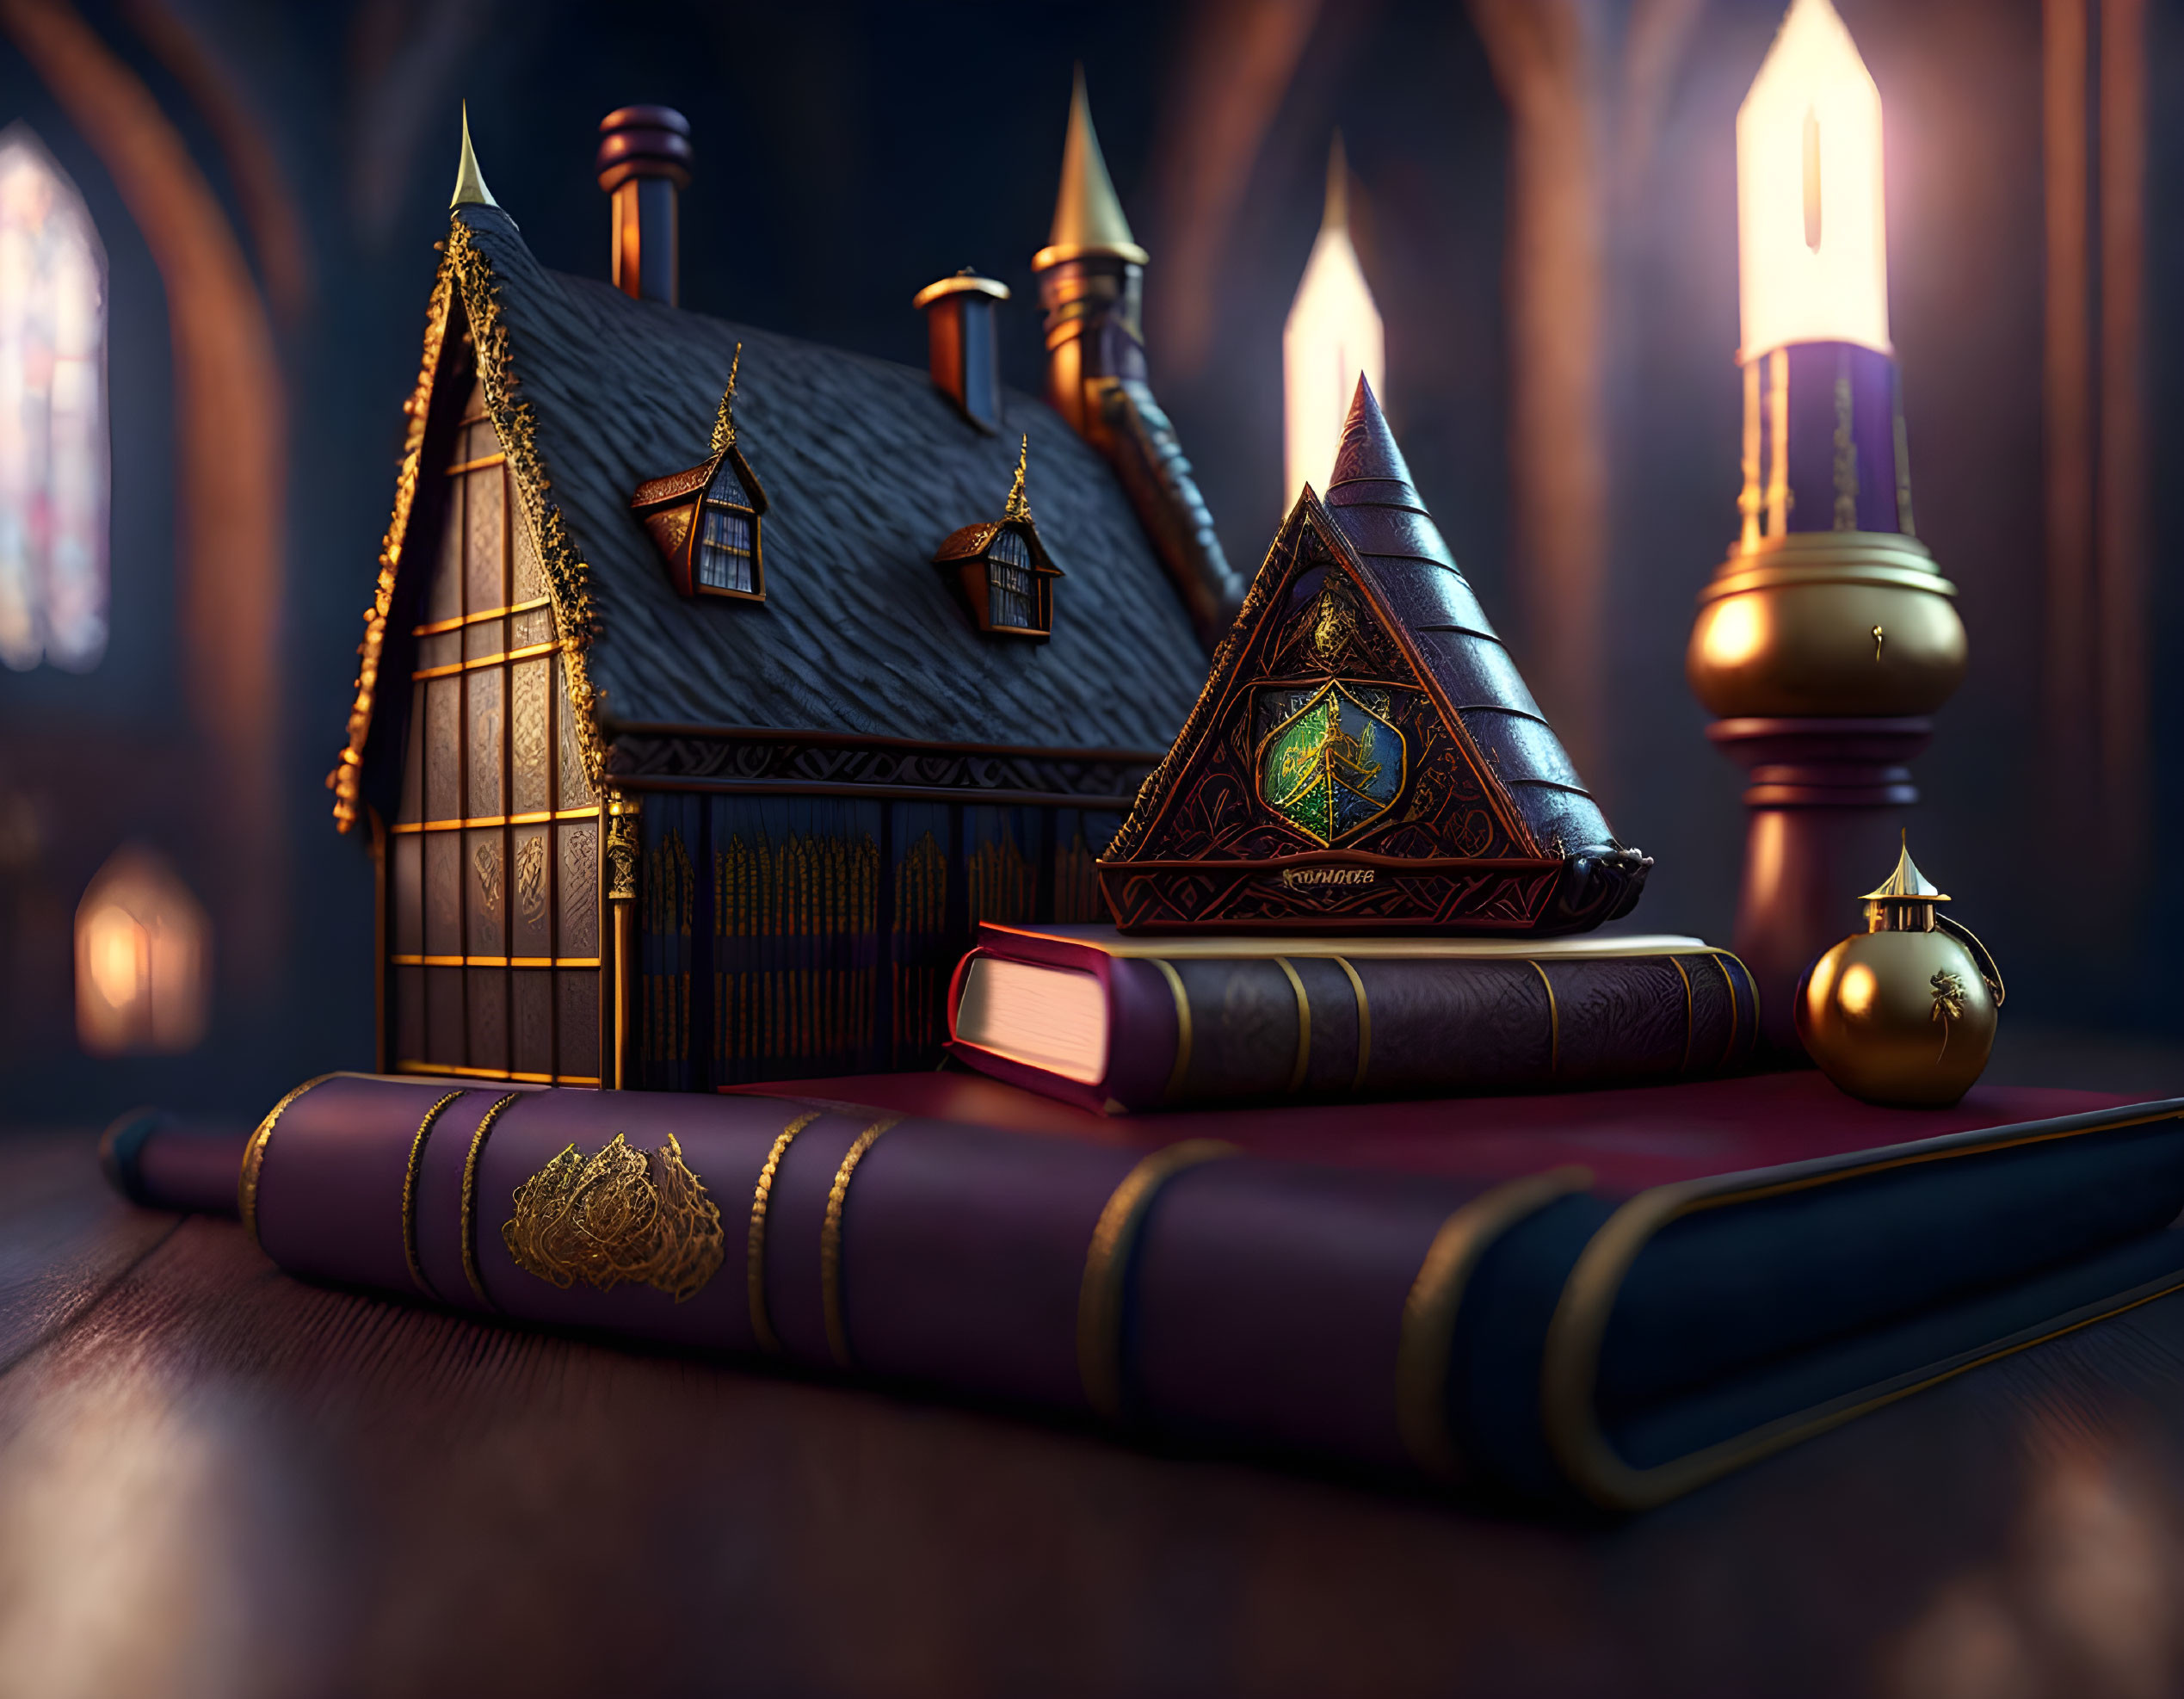 Miniature fairy-tale house model on book with lit candles in gothic library.